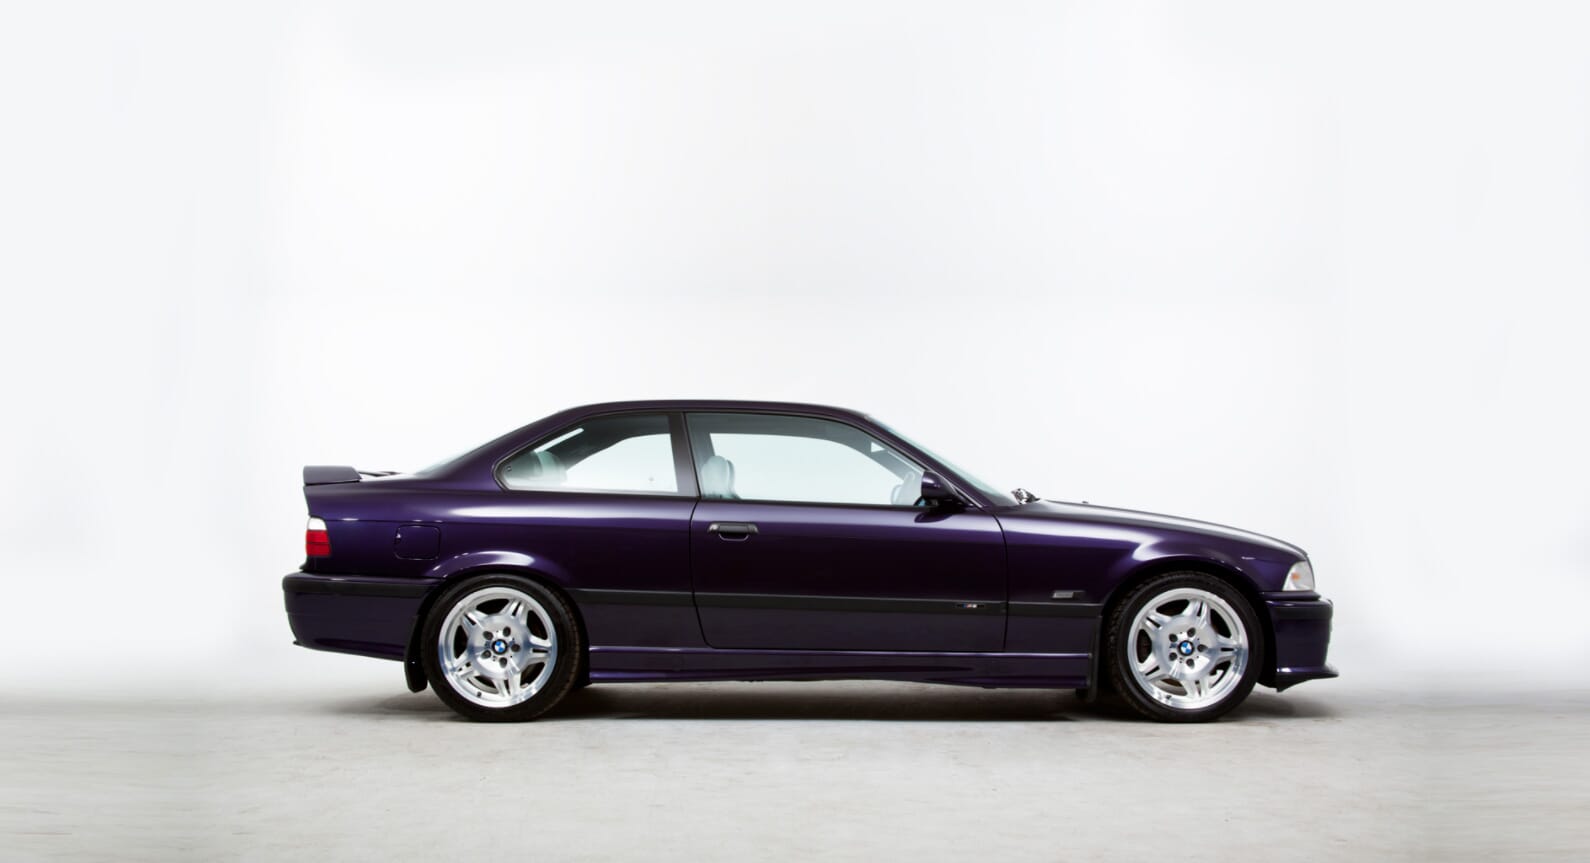 Classic Car Find Of The Week: 1996 BMW E36 M3 Evolution